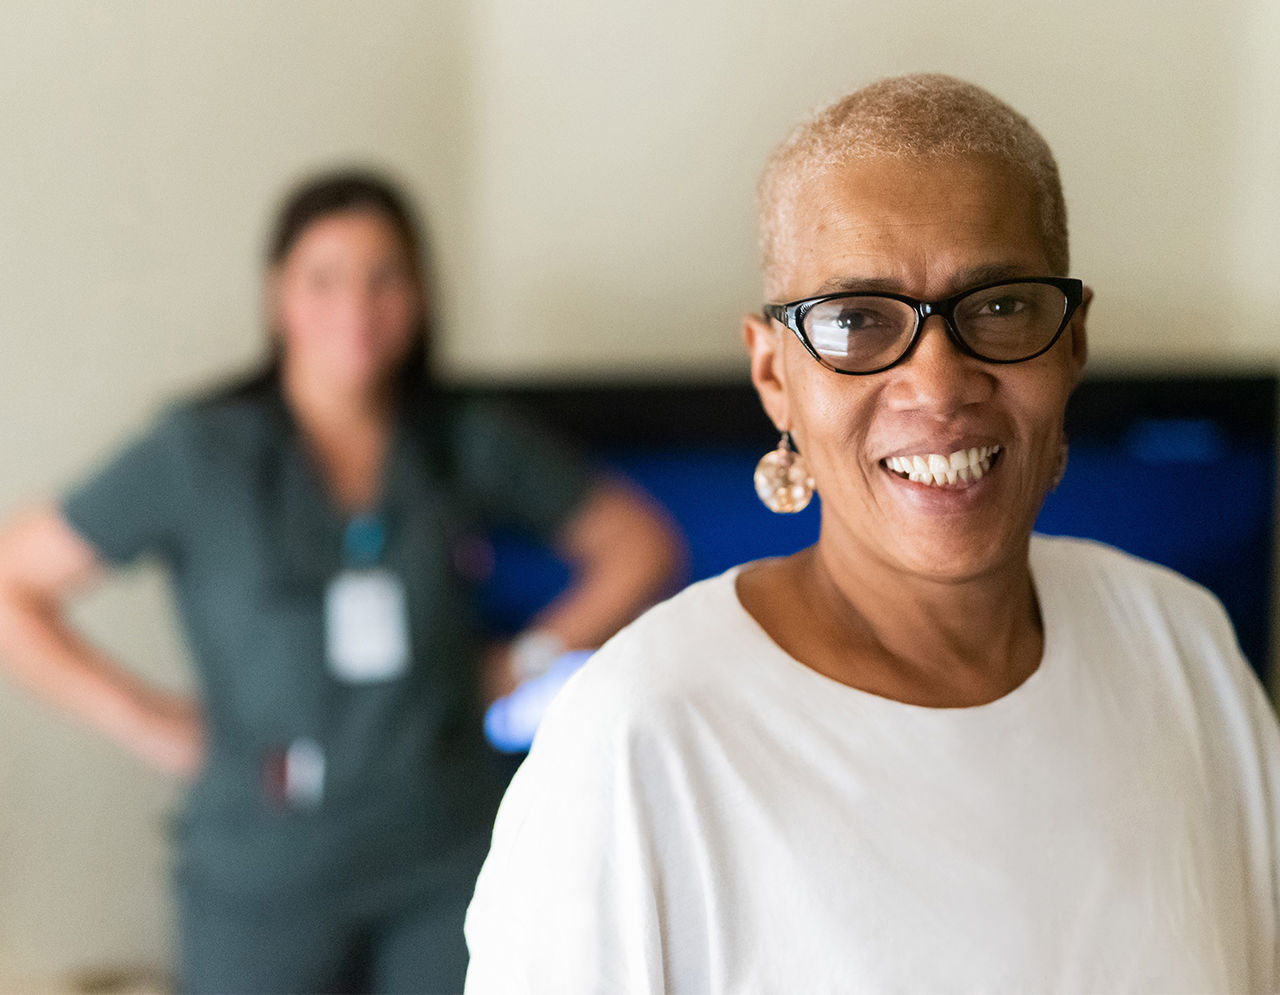 Patient smiles at the camera while a provider in scrubs stands in the background